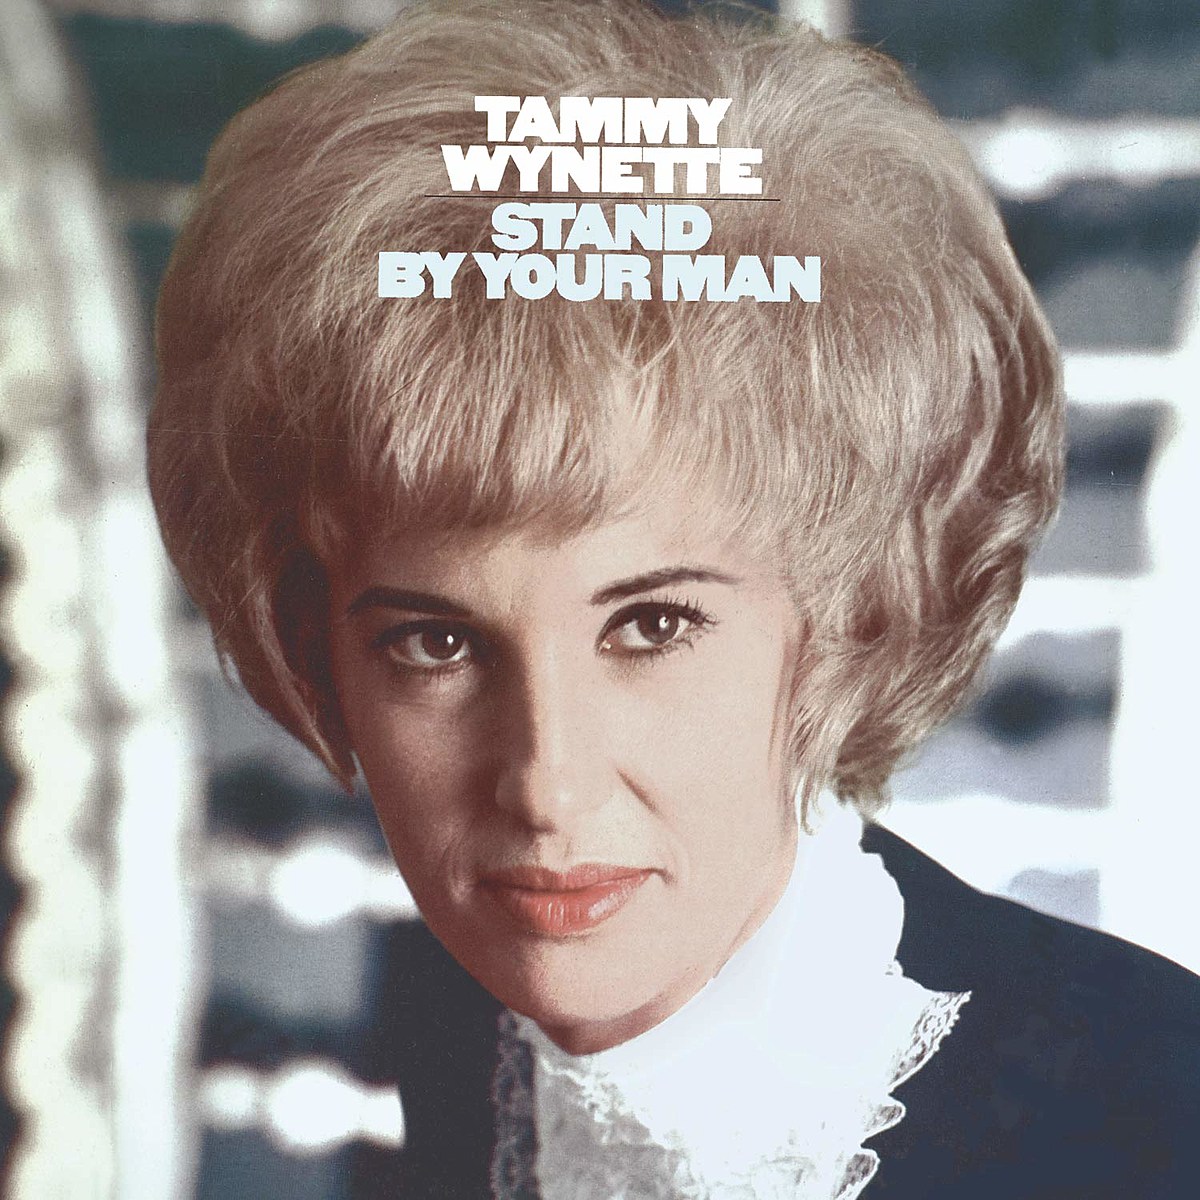 Whatever Happened To The Legendary Tammy Wynette?